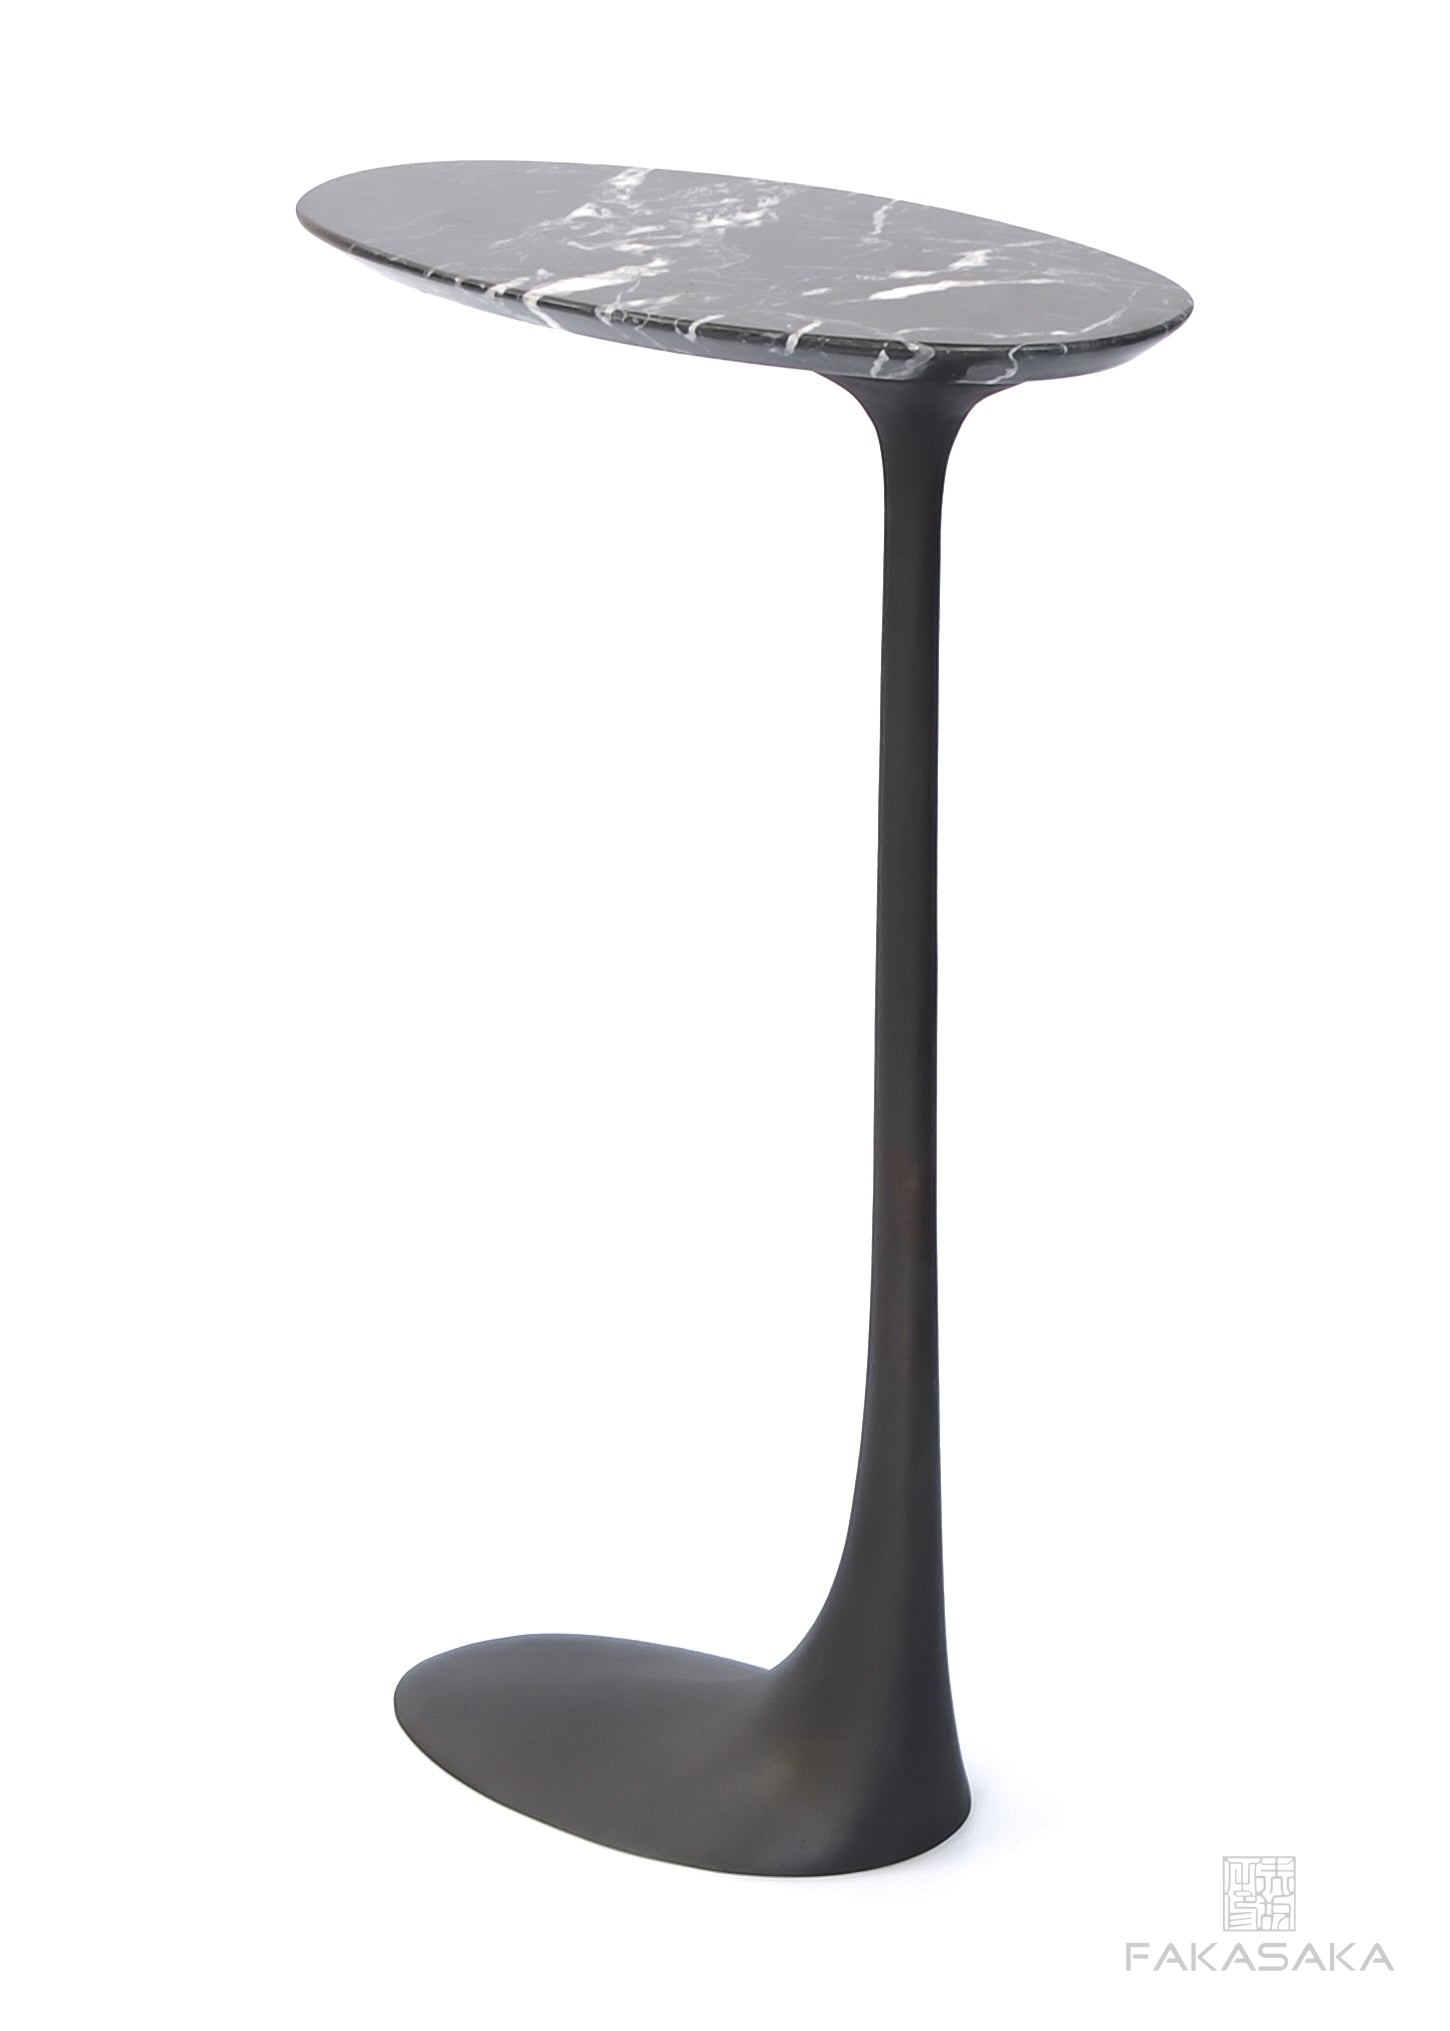 KEITH DRINK TABLE<br><br>NERO MARQUINA MARBLE<br>DARK TEXTURED BRONZE